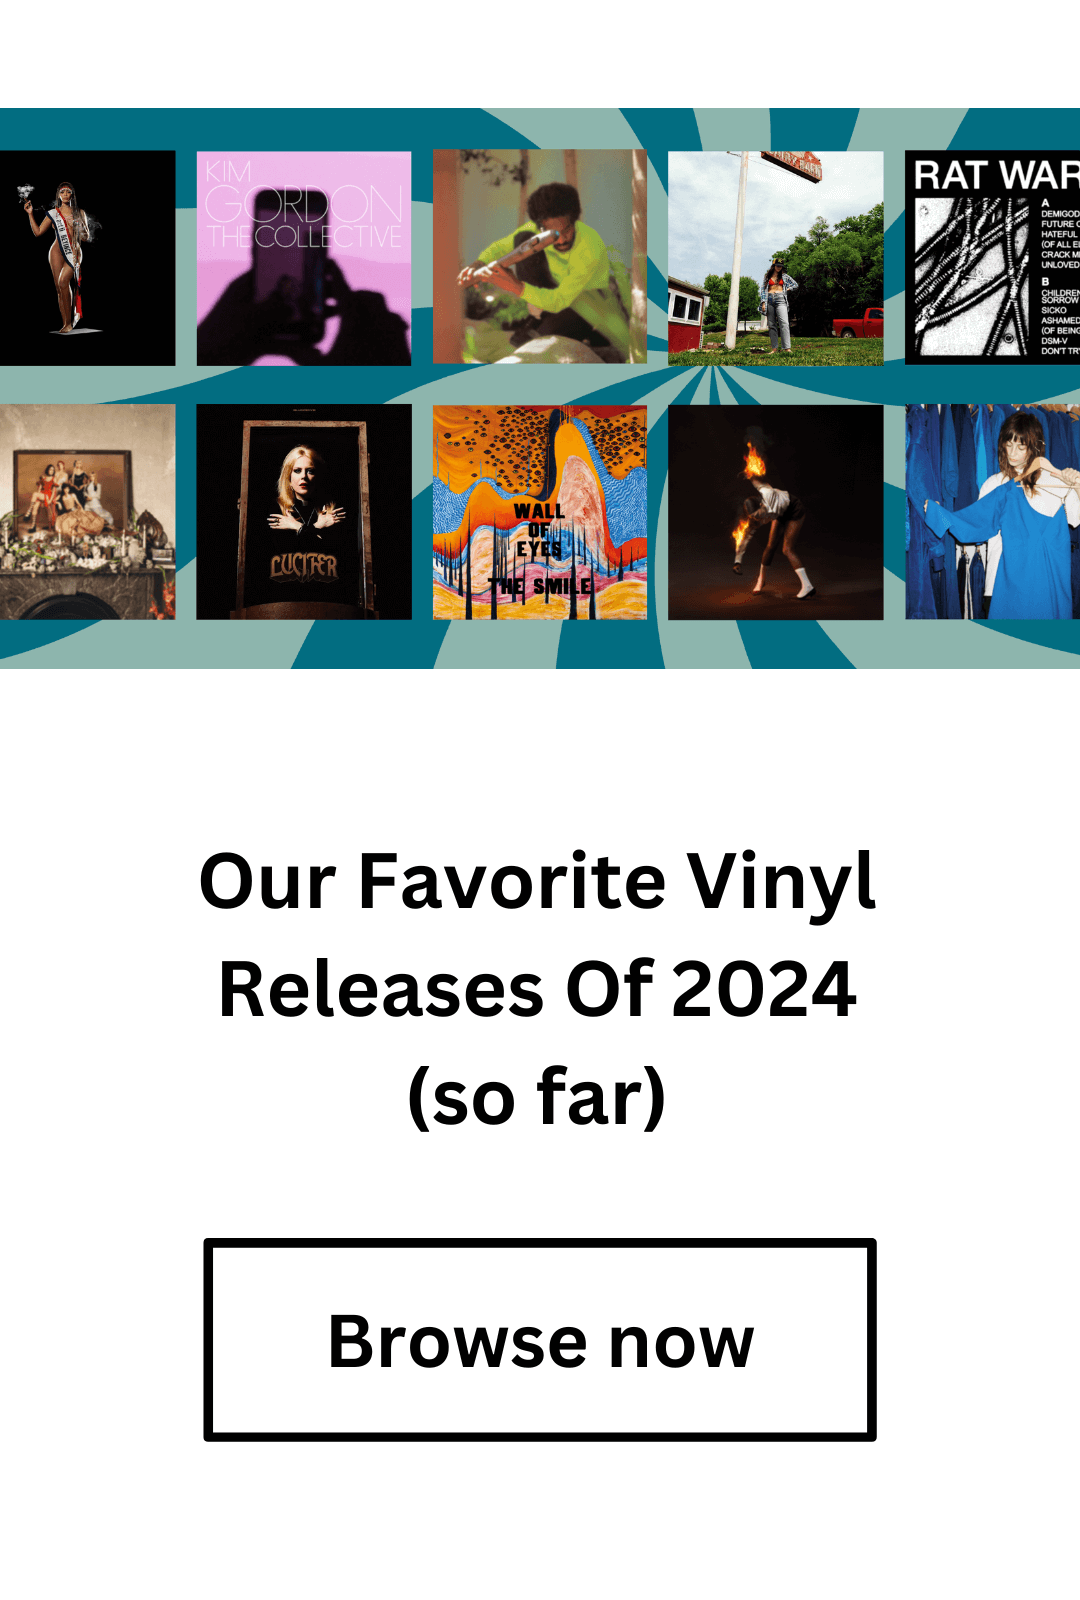 Our Favorite Vinyl Releases